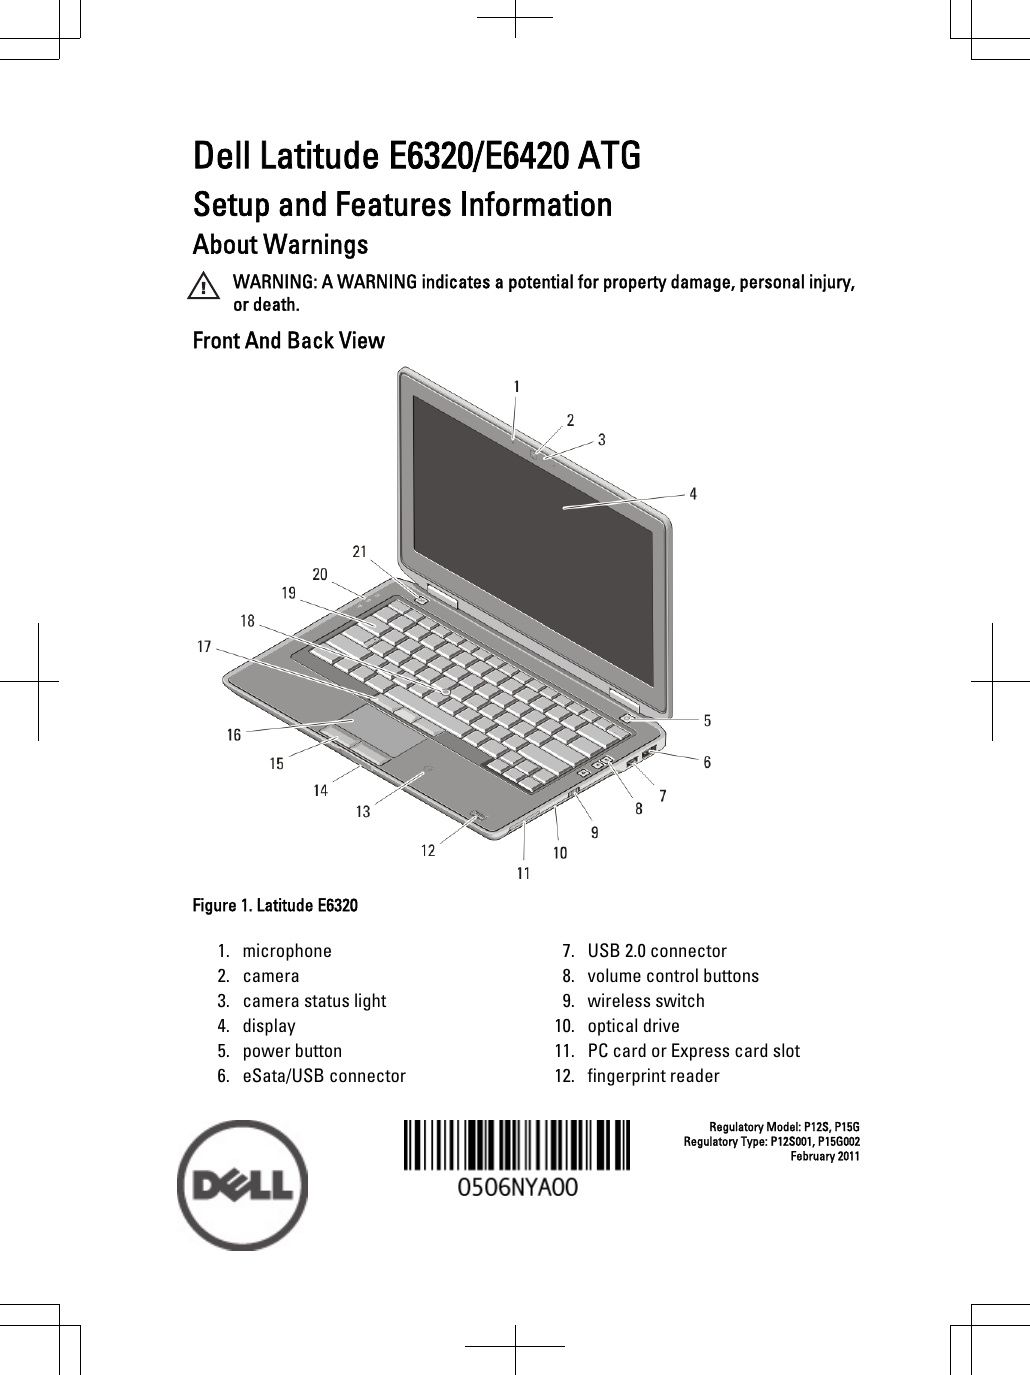 Dell Latitude E6320/E6420 ATGSetup and Features InformationAbout WarningsWARNING: A WARNING indicates a potential for property damage, personal injury,or death.Front And Back ViewFigure 1. Latitude E63201. microphone2. camera3. camera status light4. display5. power button6. eSata/USB connector7. USB 2.0 connector8. volume control buttons9. wireless switch10. optical drive11. PC card or Express card slot12. fingerprint readerRegulatory Model: P12S, P15GRegulatory Type: P12S001, P15G002February 2011